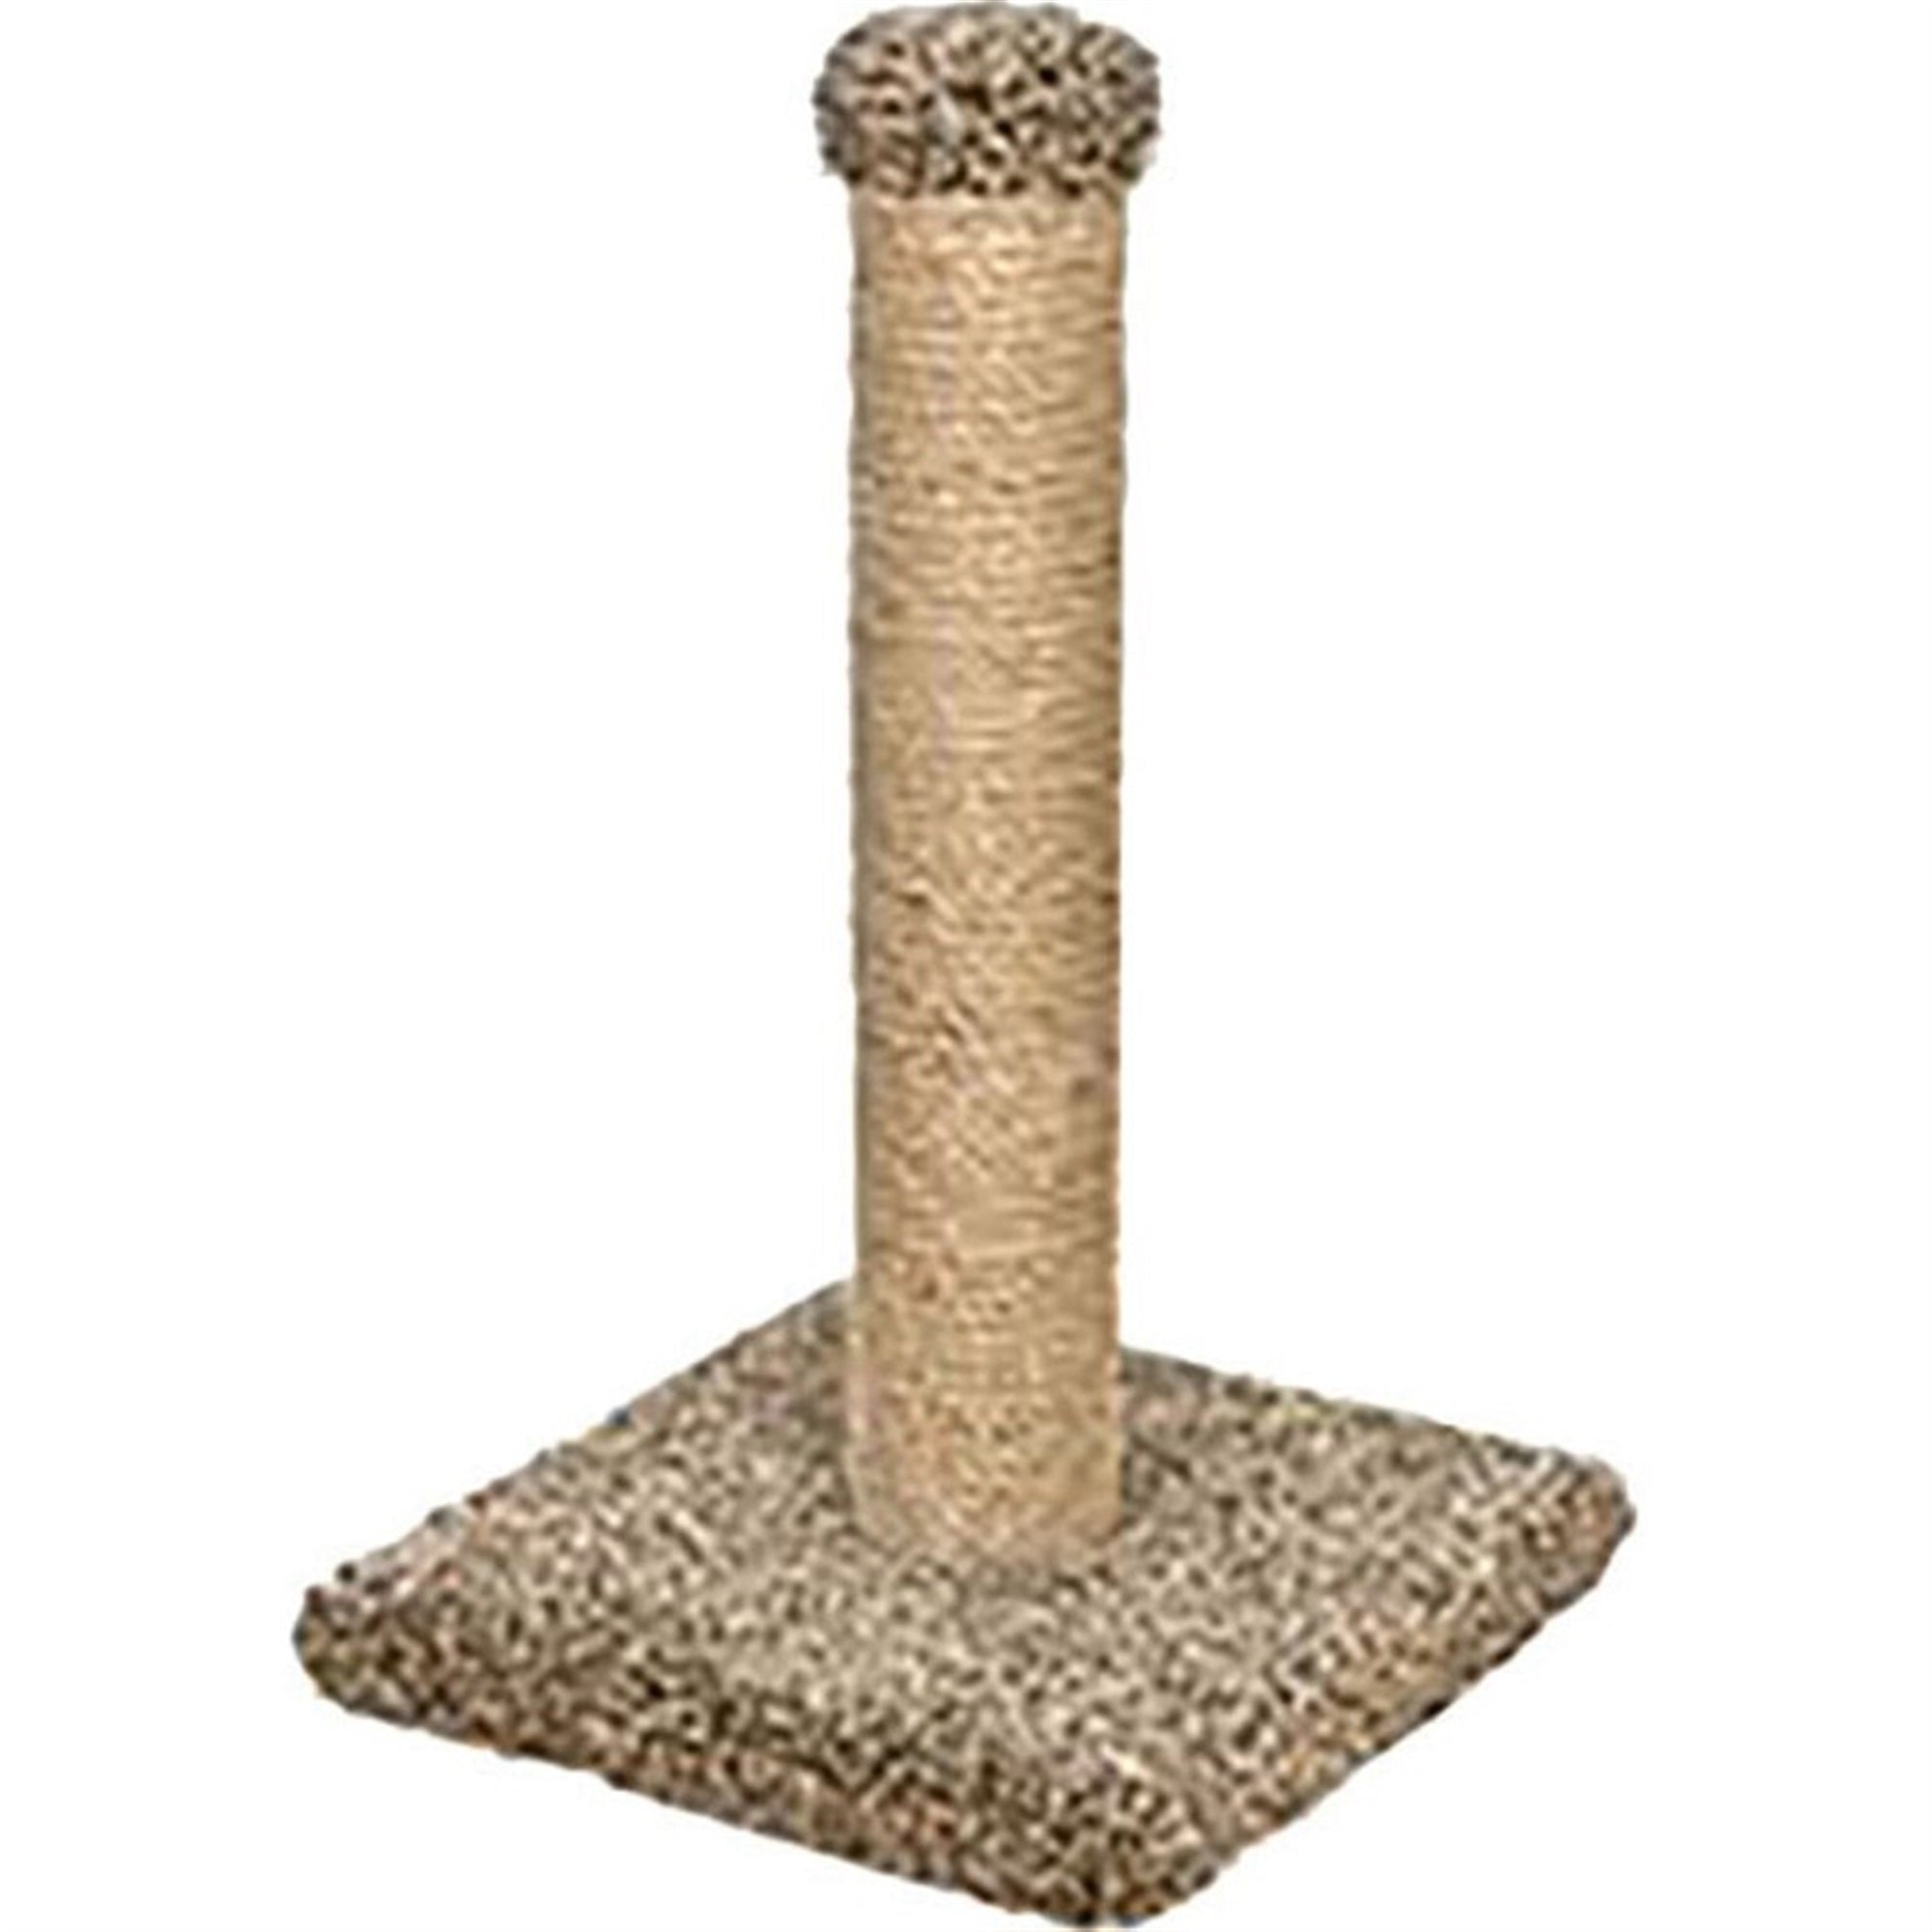 Ware Manufacturing Products Cat Scratching Post, 21”